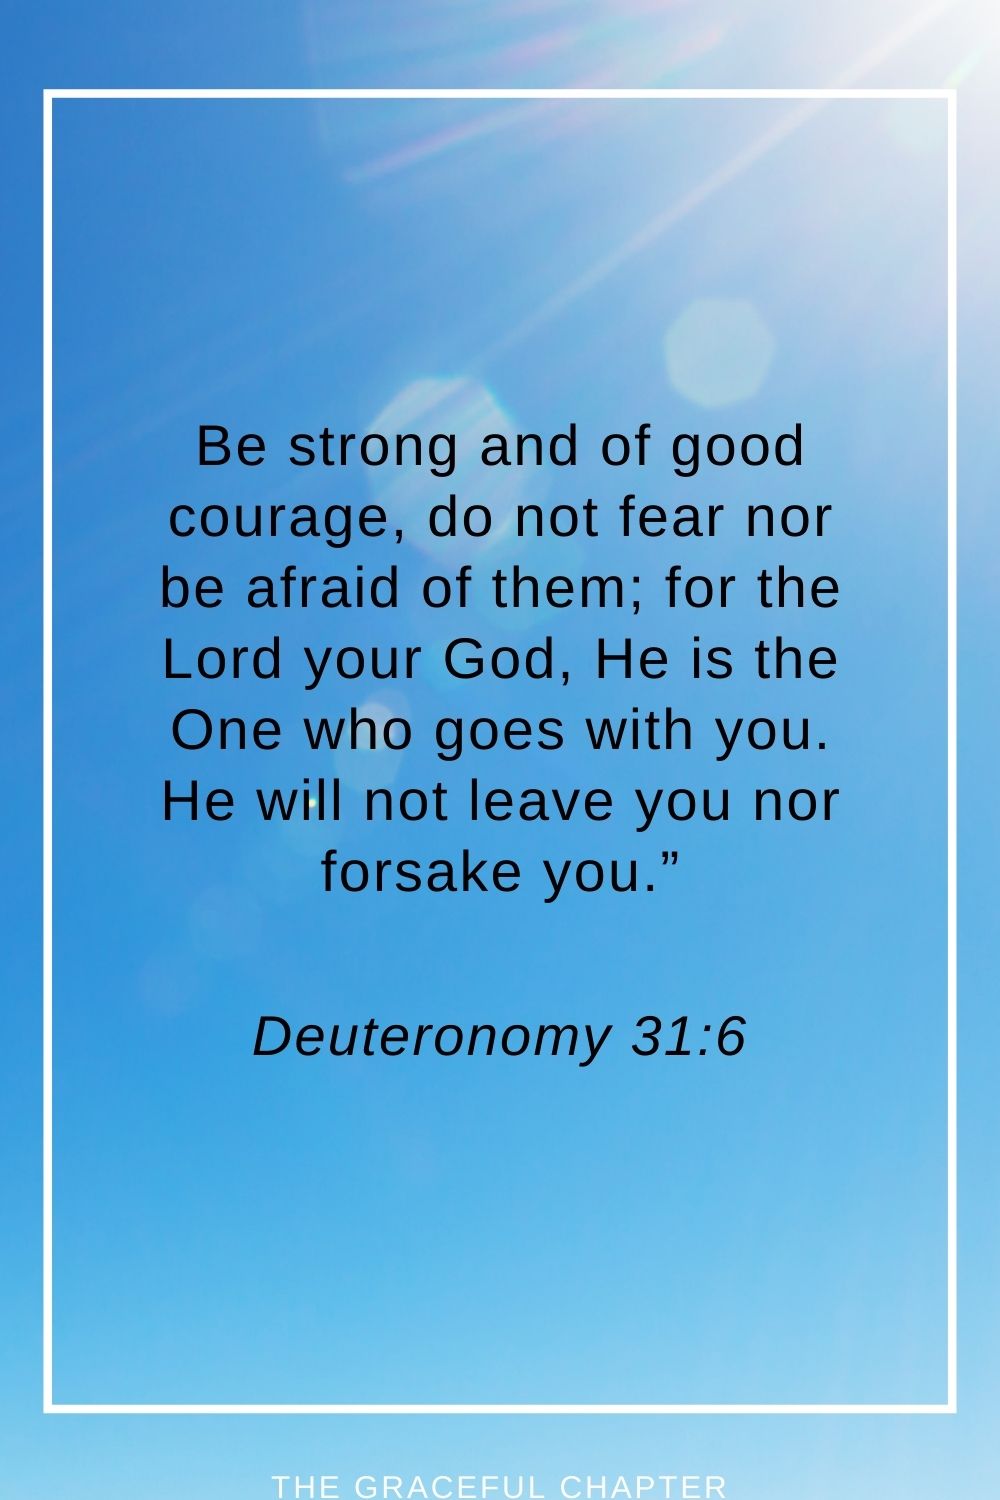 Be strong and of good courage, do not fear nor be afraid of them; for the Lord your God, He is the One who goes with you. He will not leave you nor forsake you.” Deuteronomy 31:6